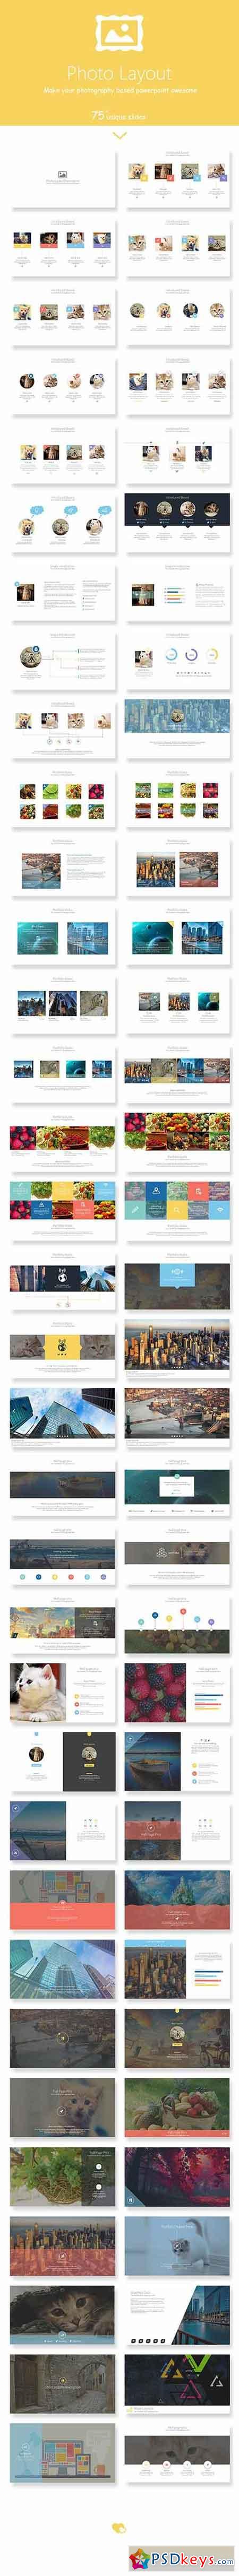 Photo Layout Powerpoint Presentation Template 12351973